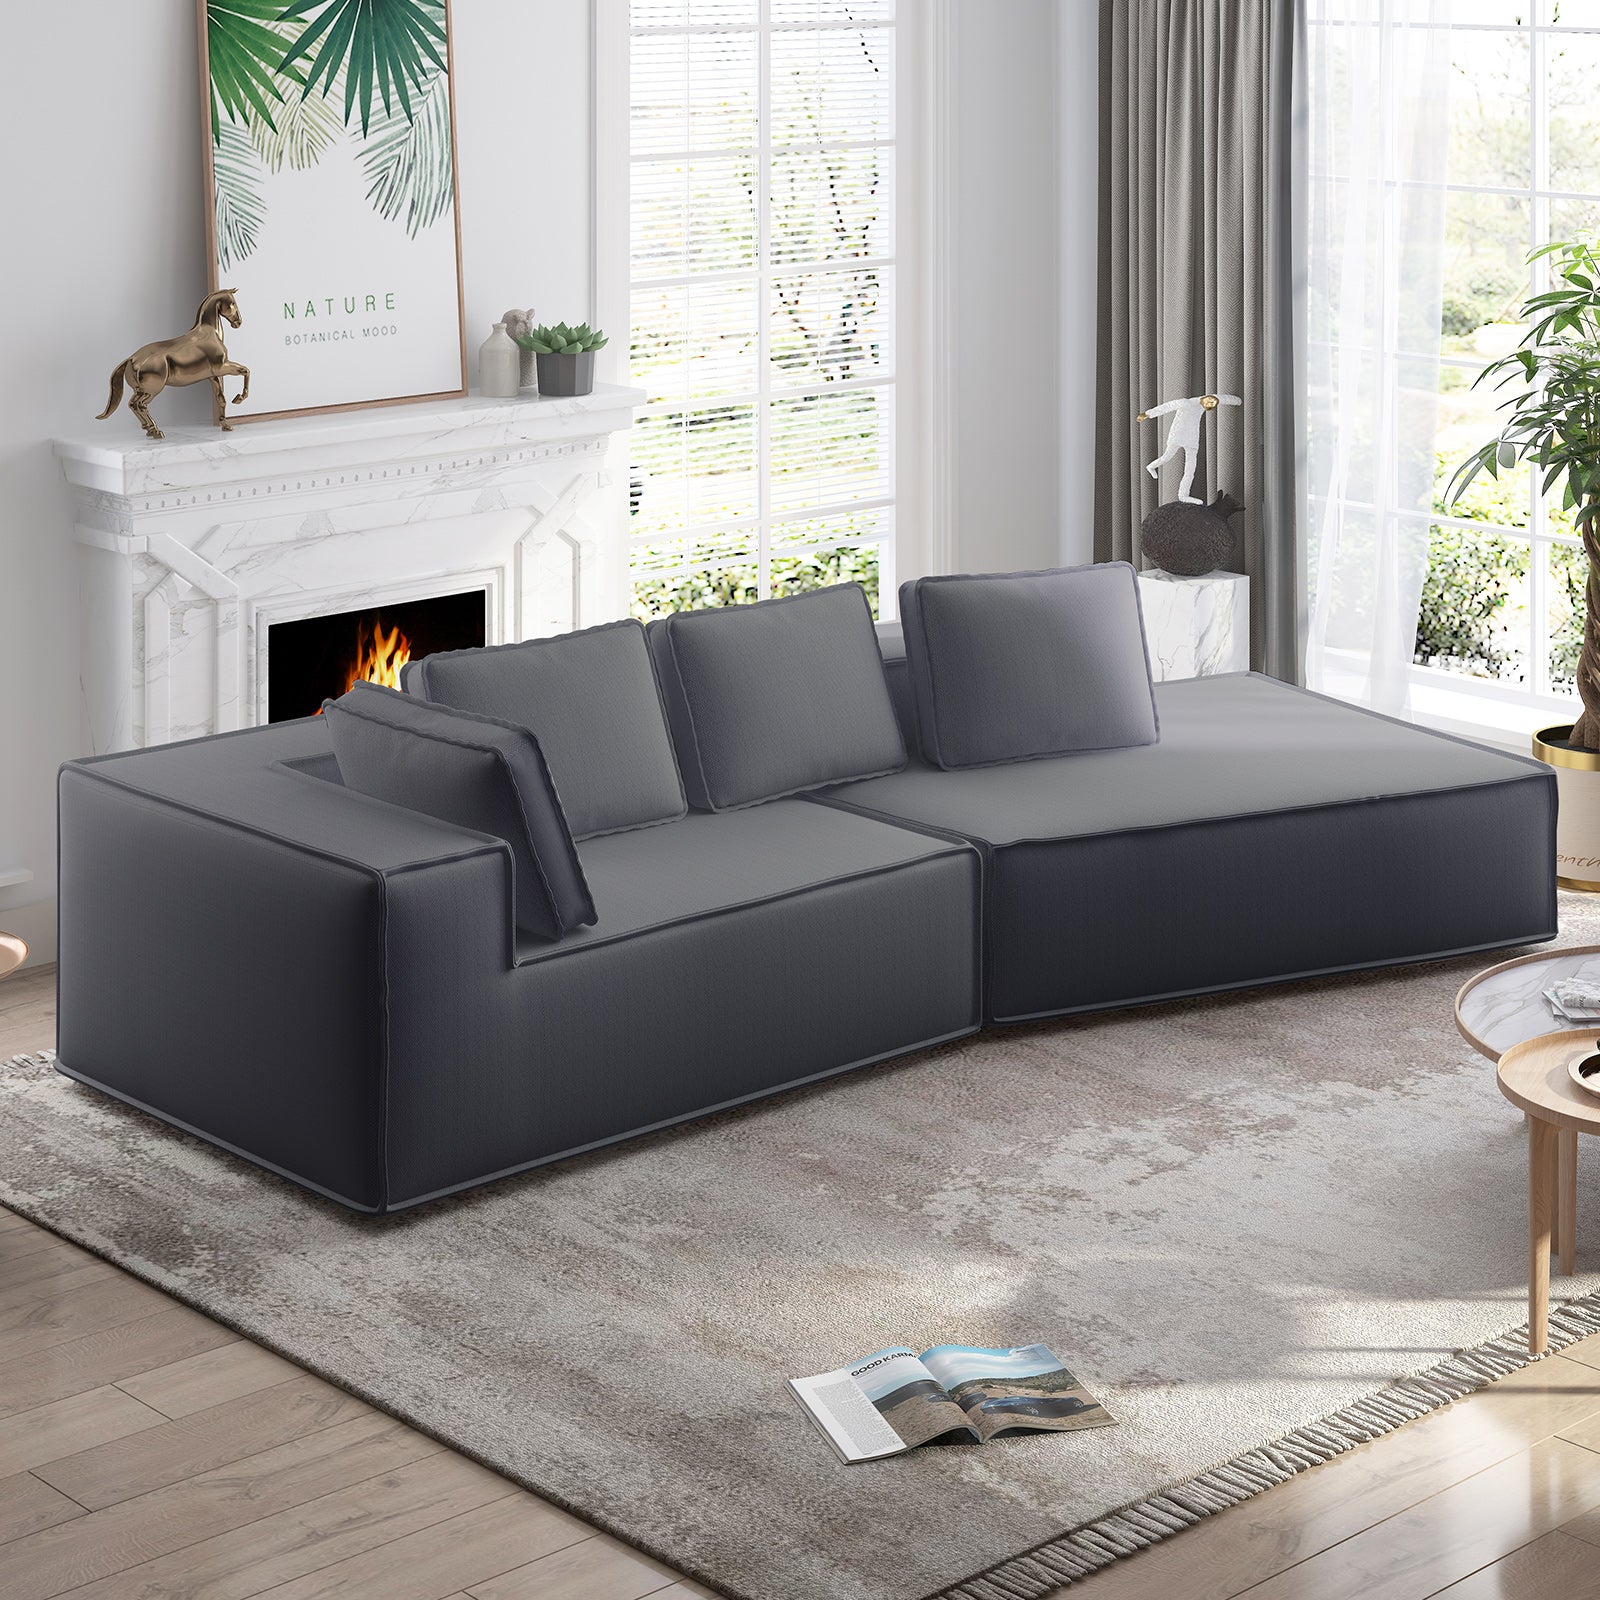 Mjkone 122'' Convertible Sectional Sofa, Oversized Sleeper Couch, Curved Modern Sofas for Living Room